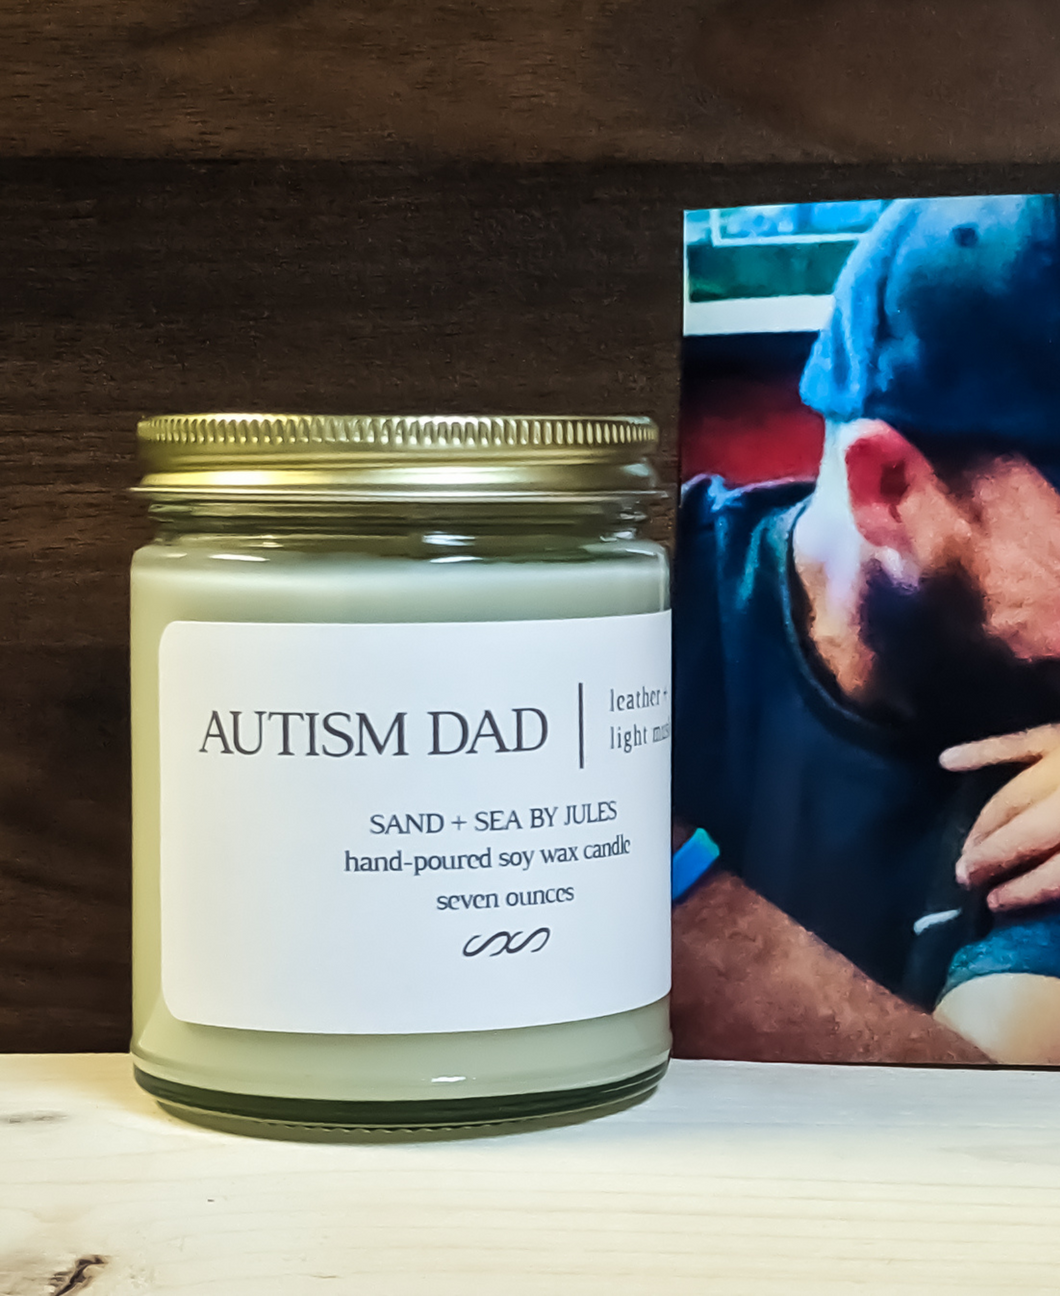 Autism Dad: Leather + Light Musk